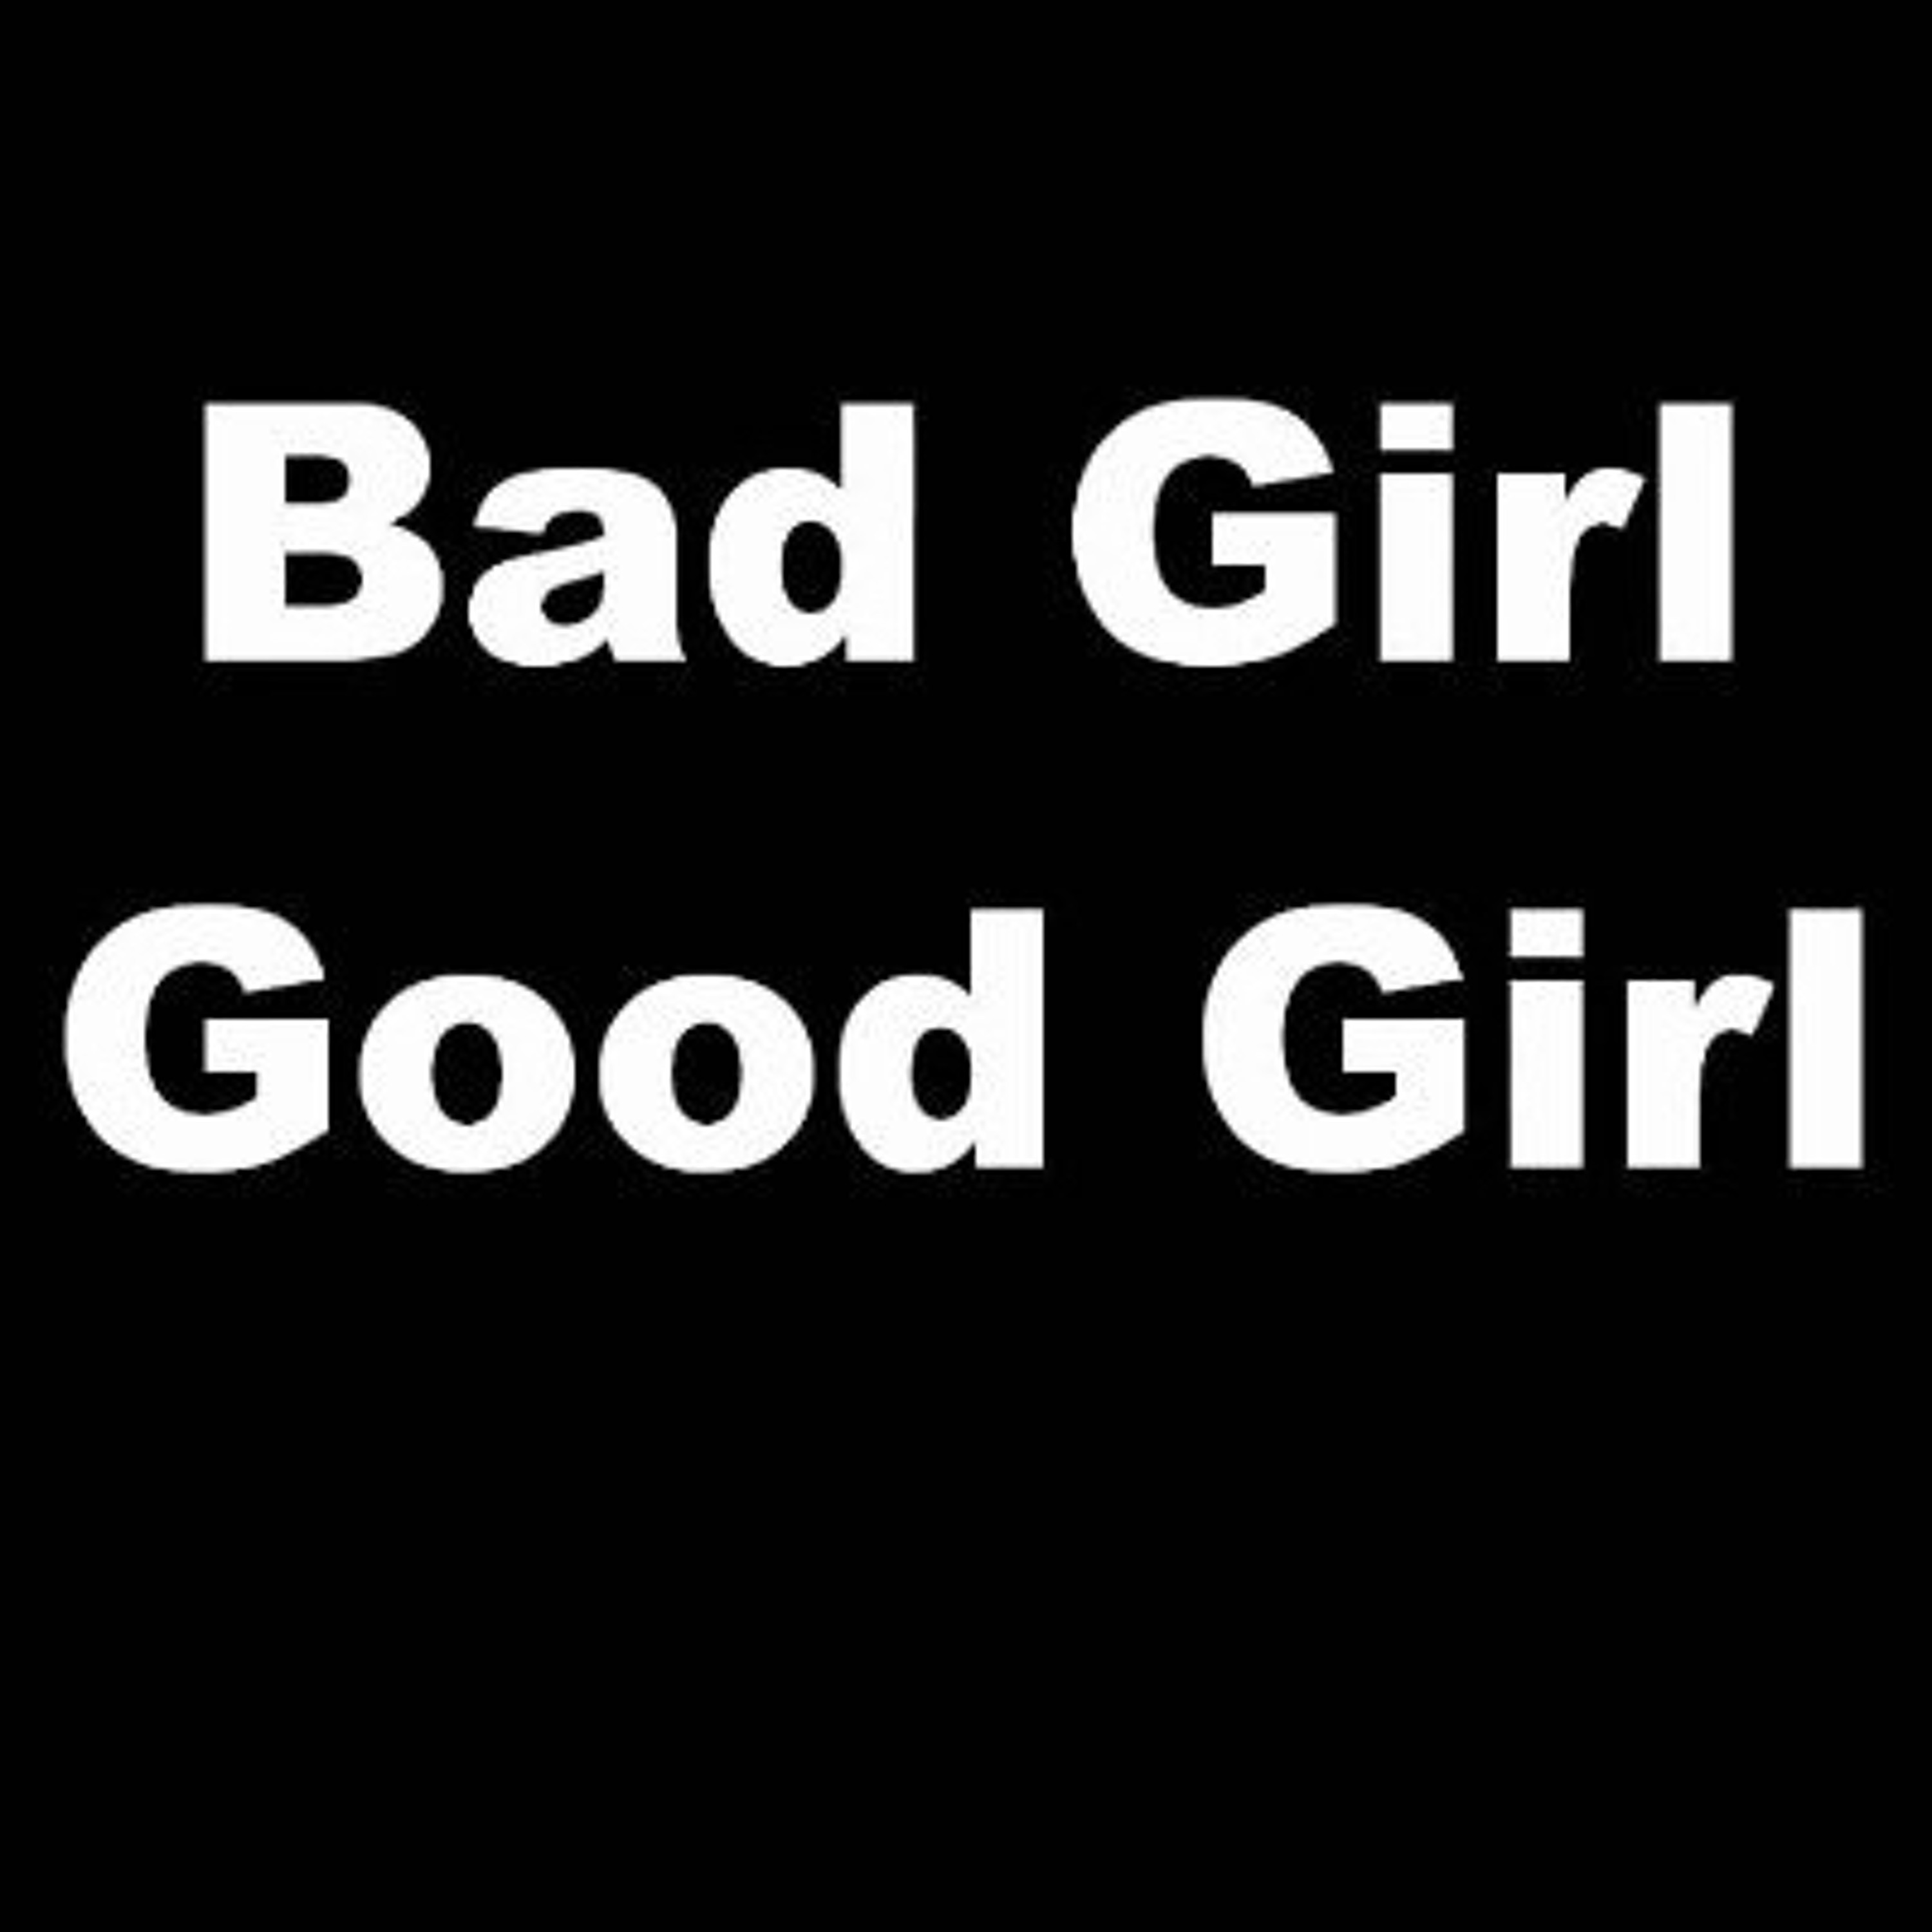 Bad Girl Good Girl Show Ep50: Find Your Strength !! 8/23/22 Image